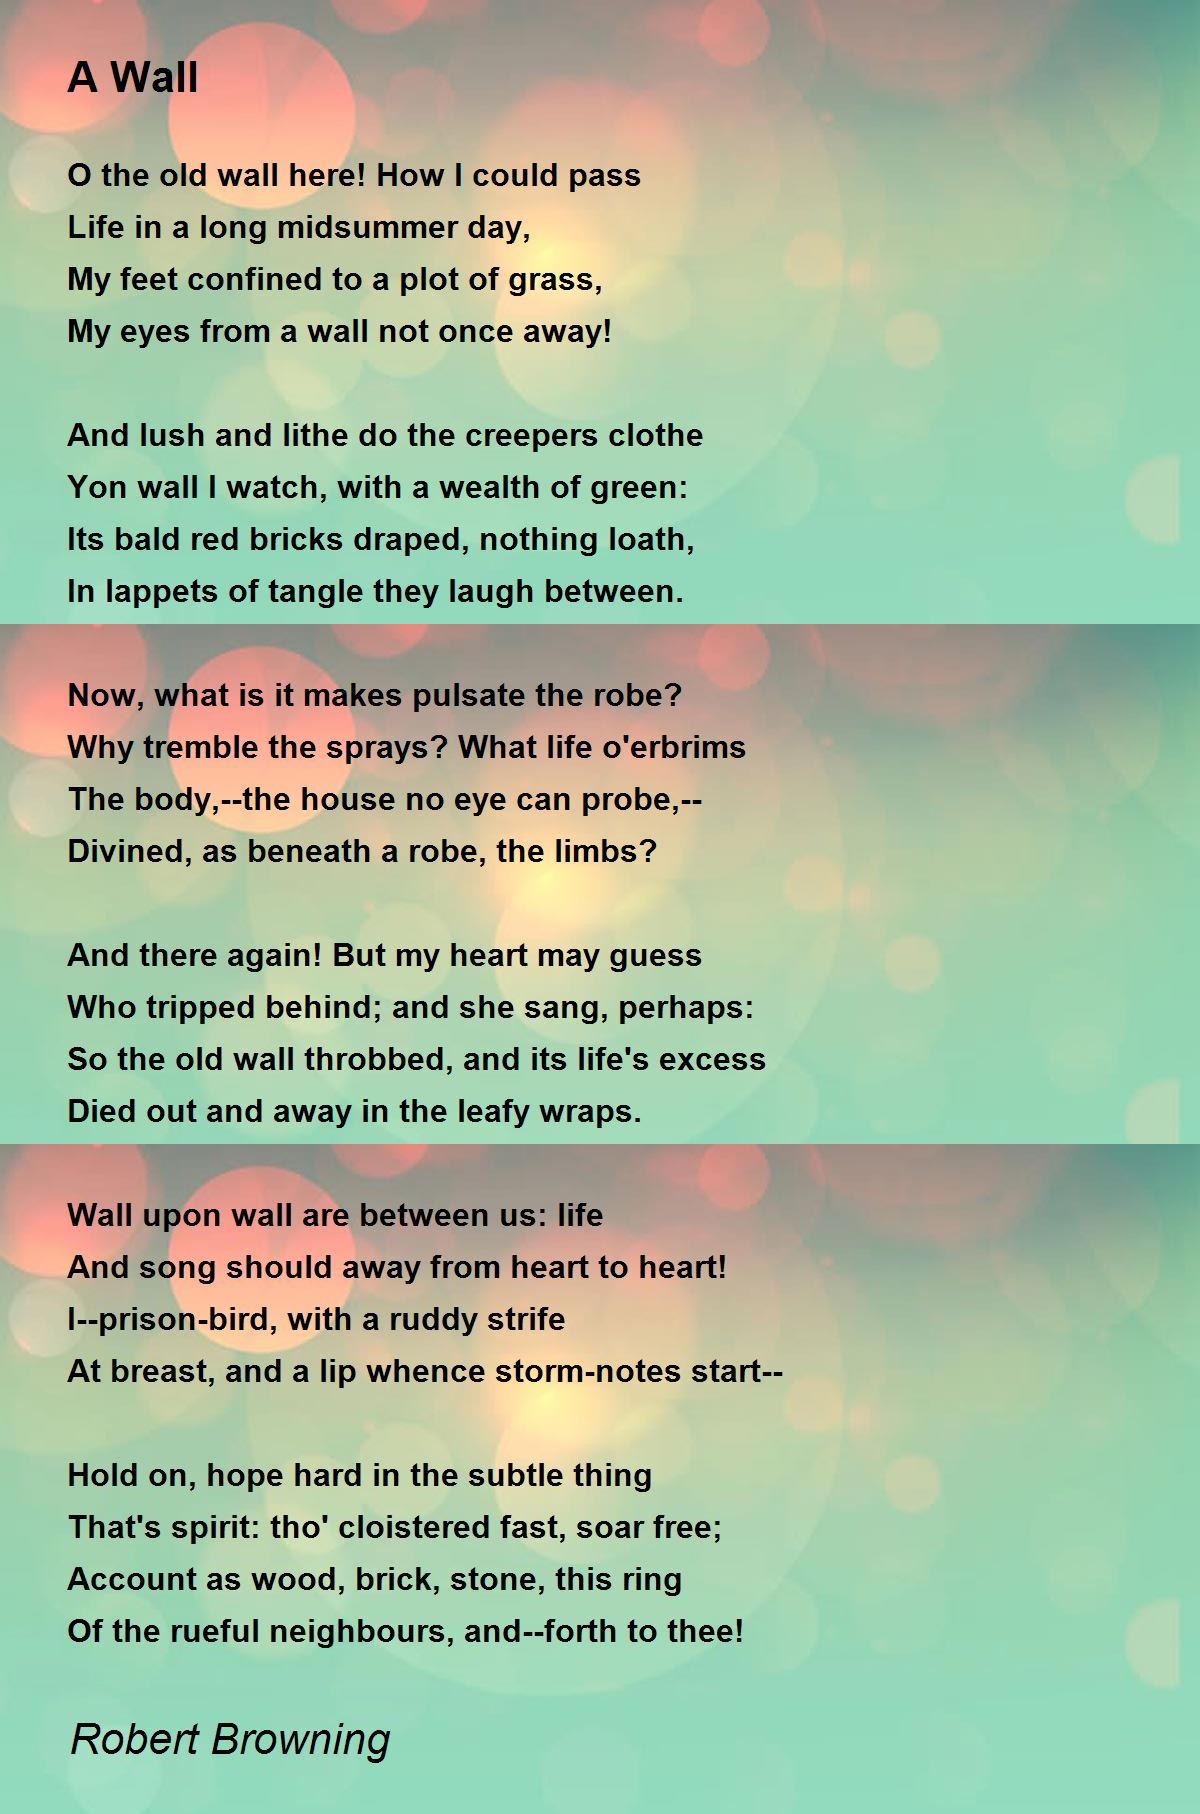 A Wall Poem by Robert Browning - Poem Hunter